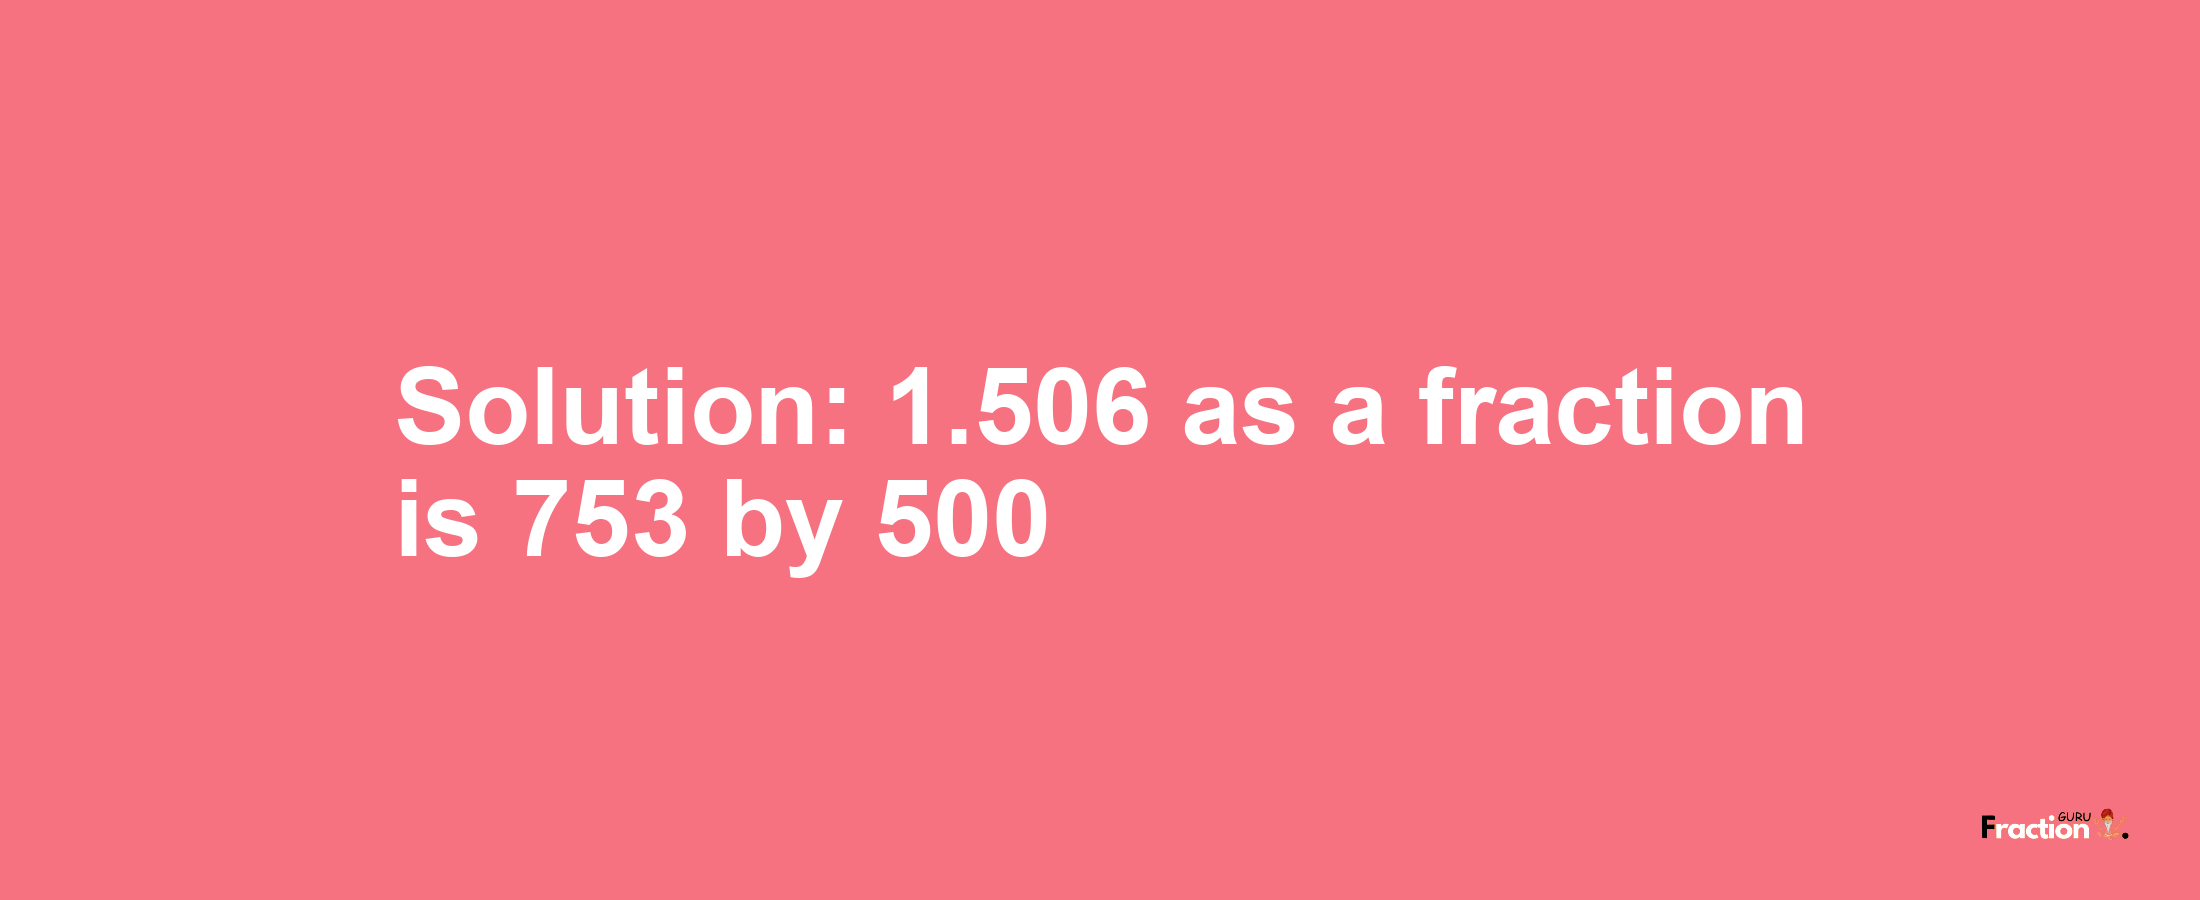 Solution:1.506 as a fraction is 753/500